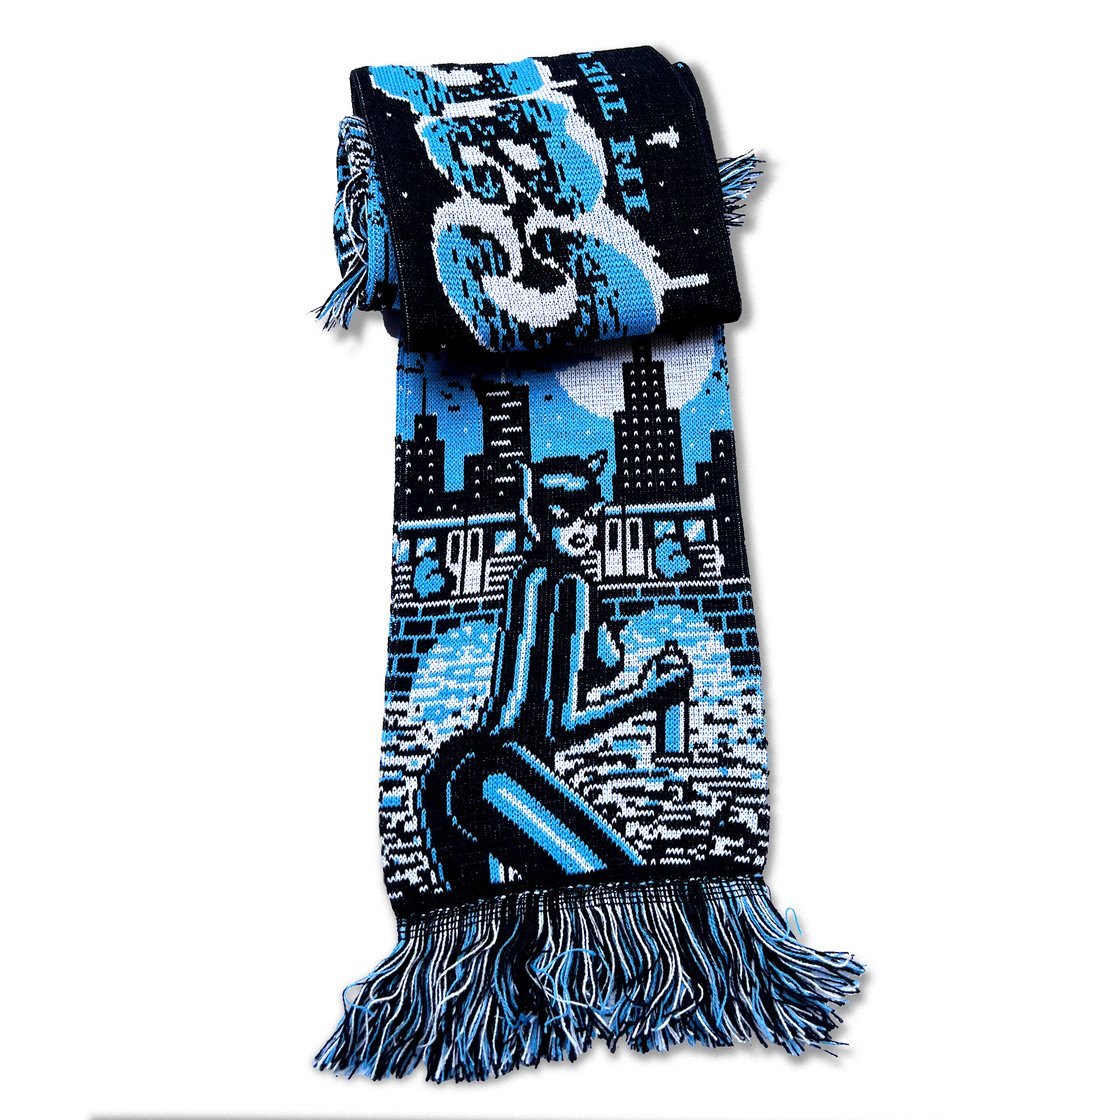 Image of Cats in the City scarf